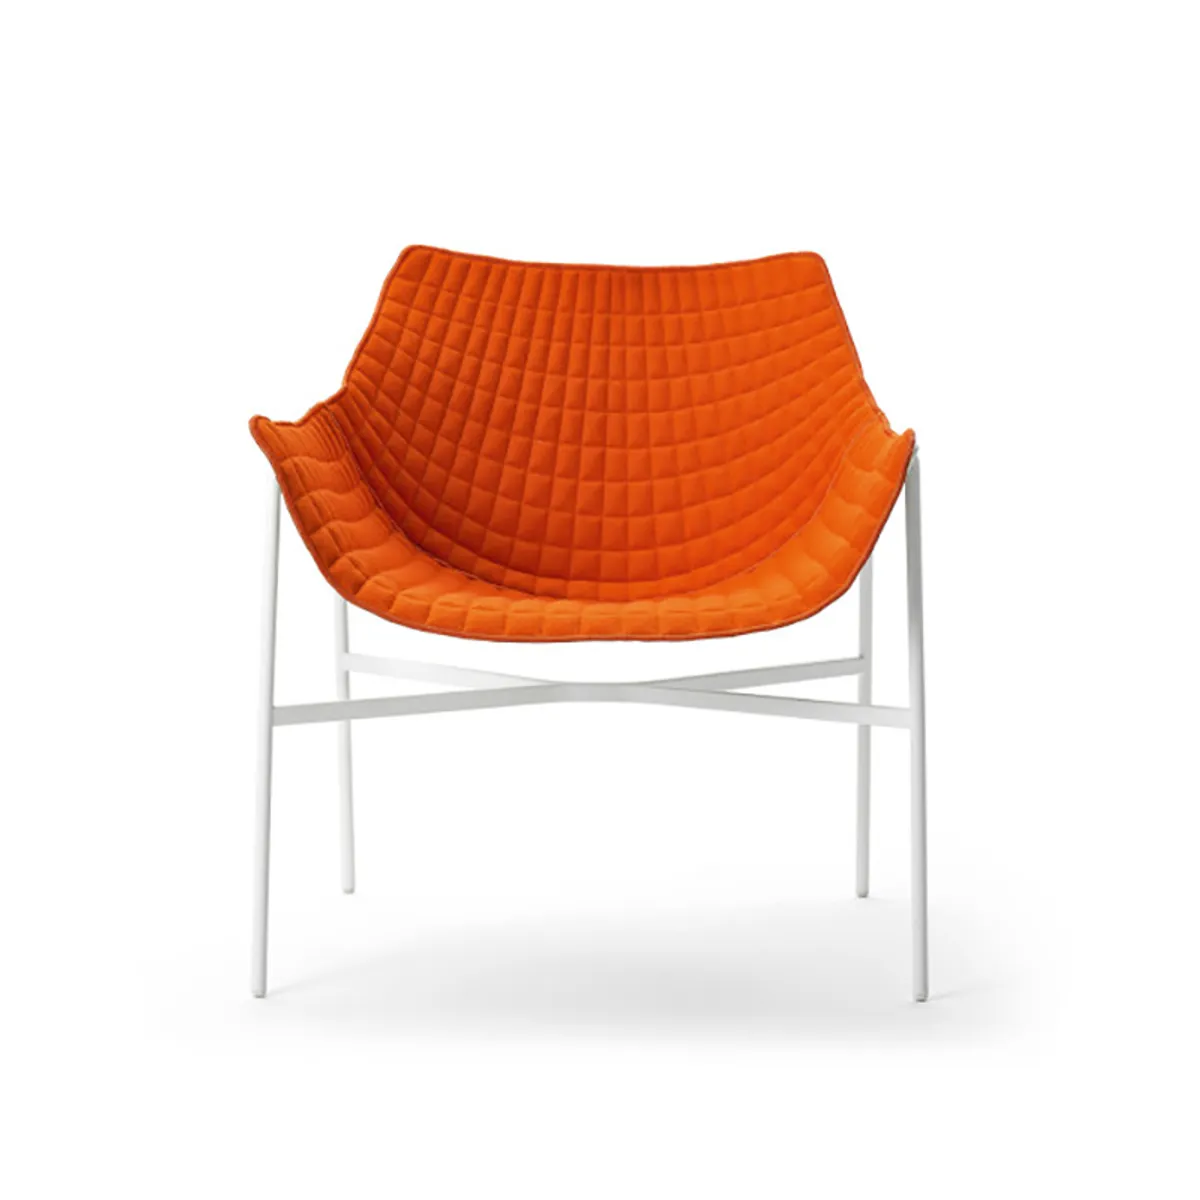 Summer White Metal Lounge Chair With Orange Seat Pad For Outside Bars And Restaurants